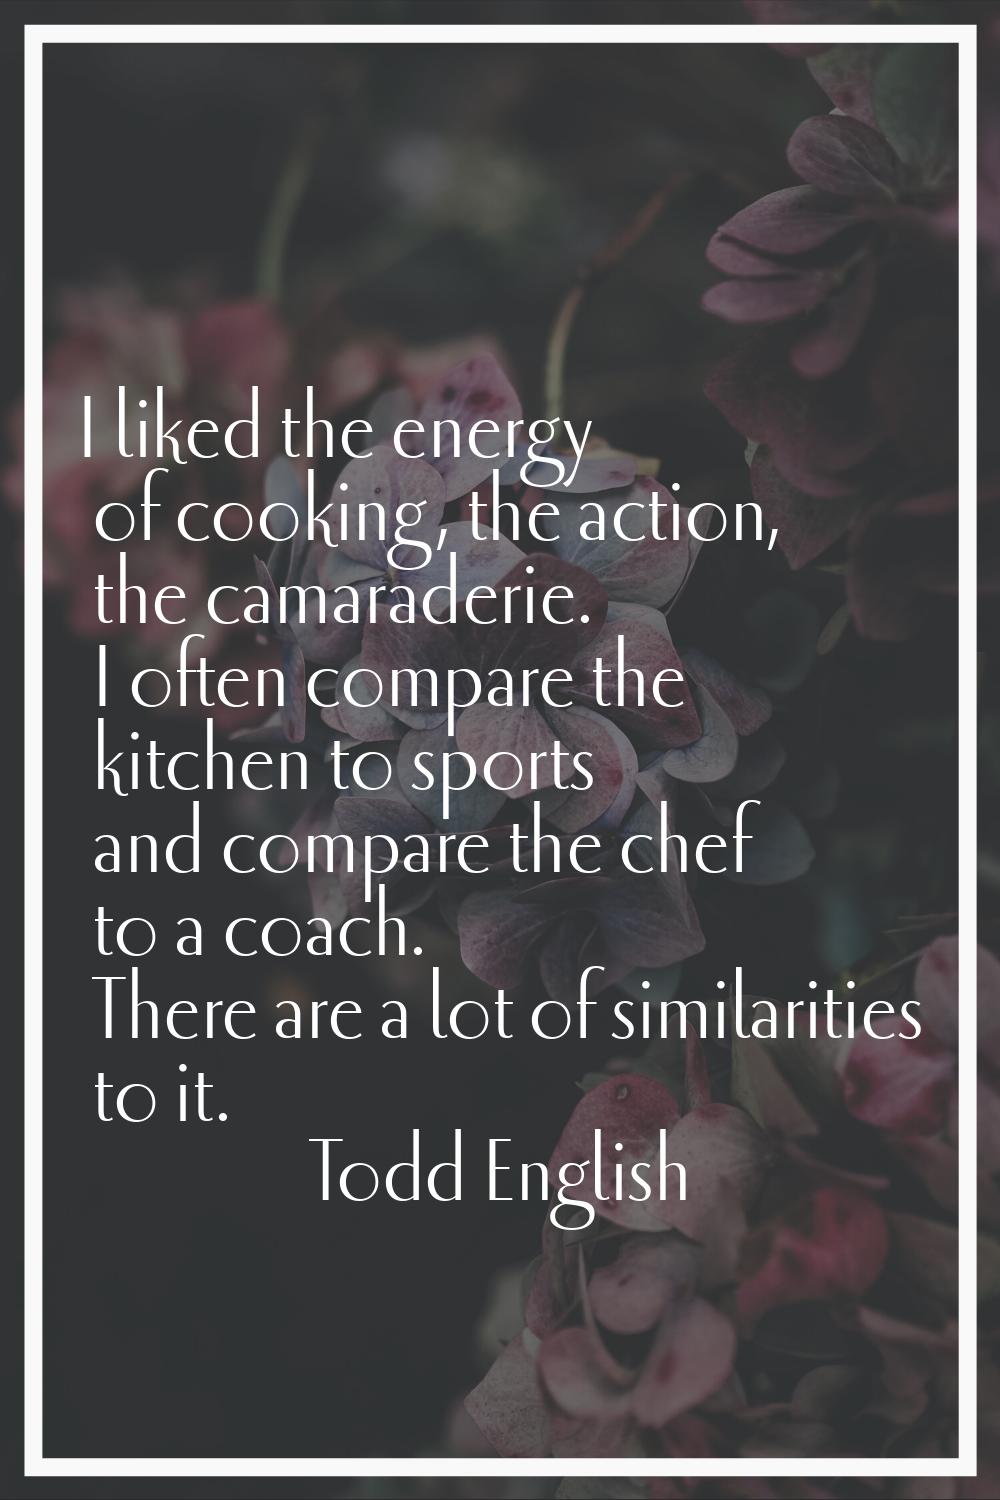 I liked the energy of cooking, the action, the camaraderie. I often compare the kitchen to sports a